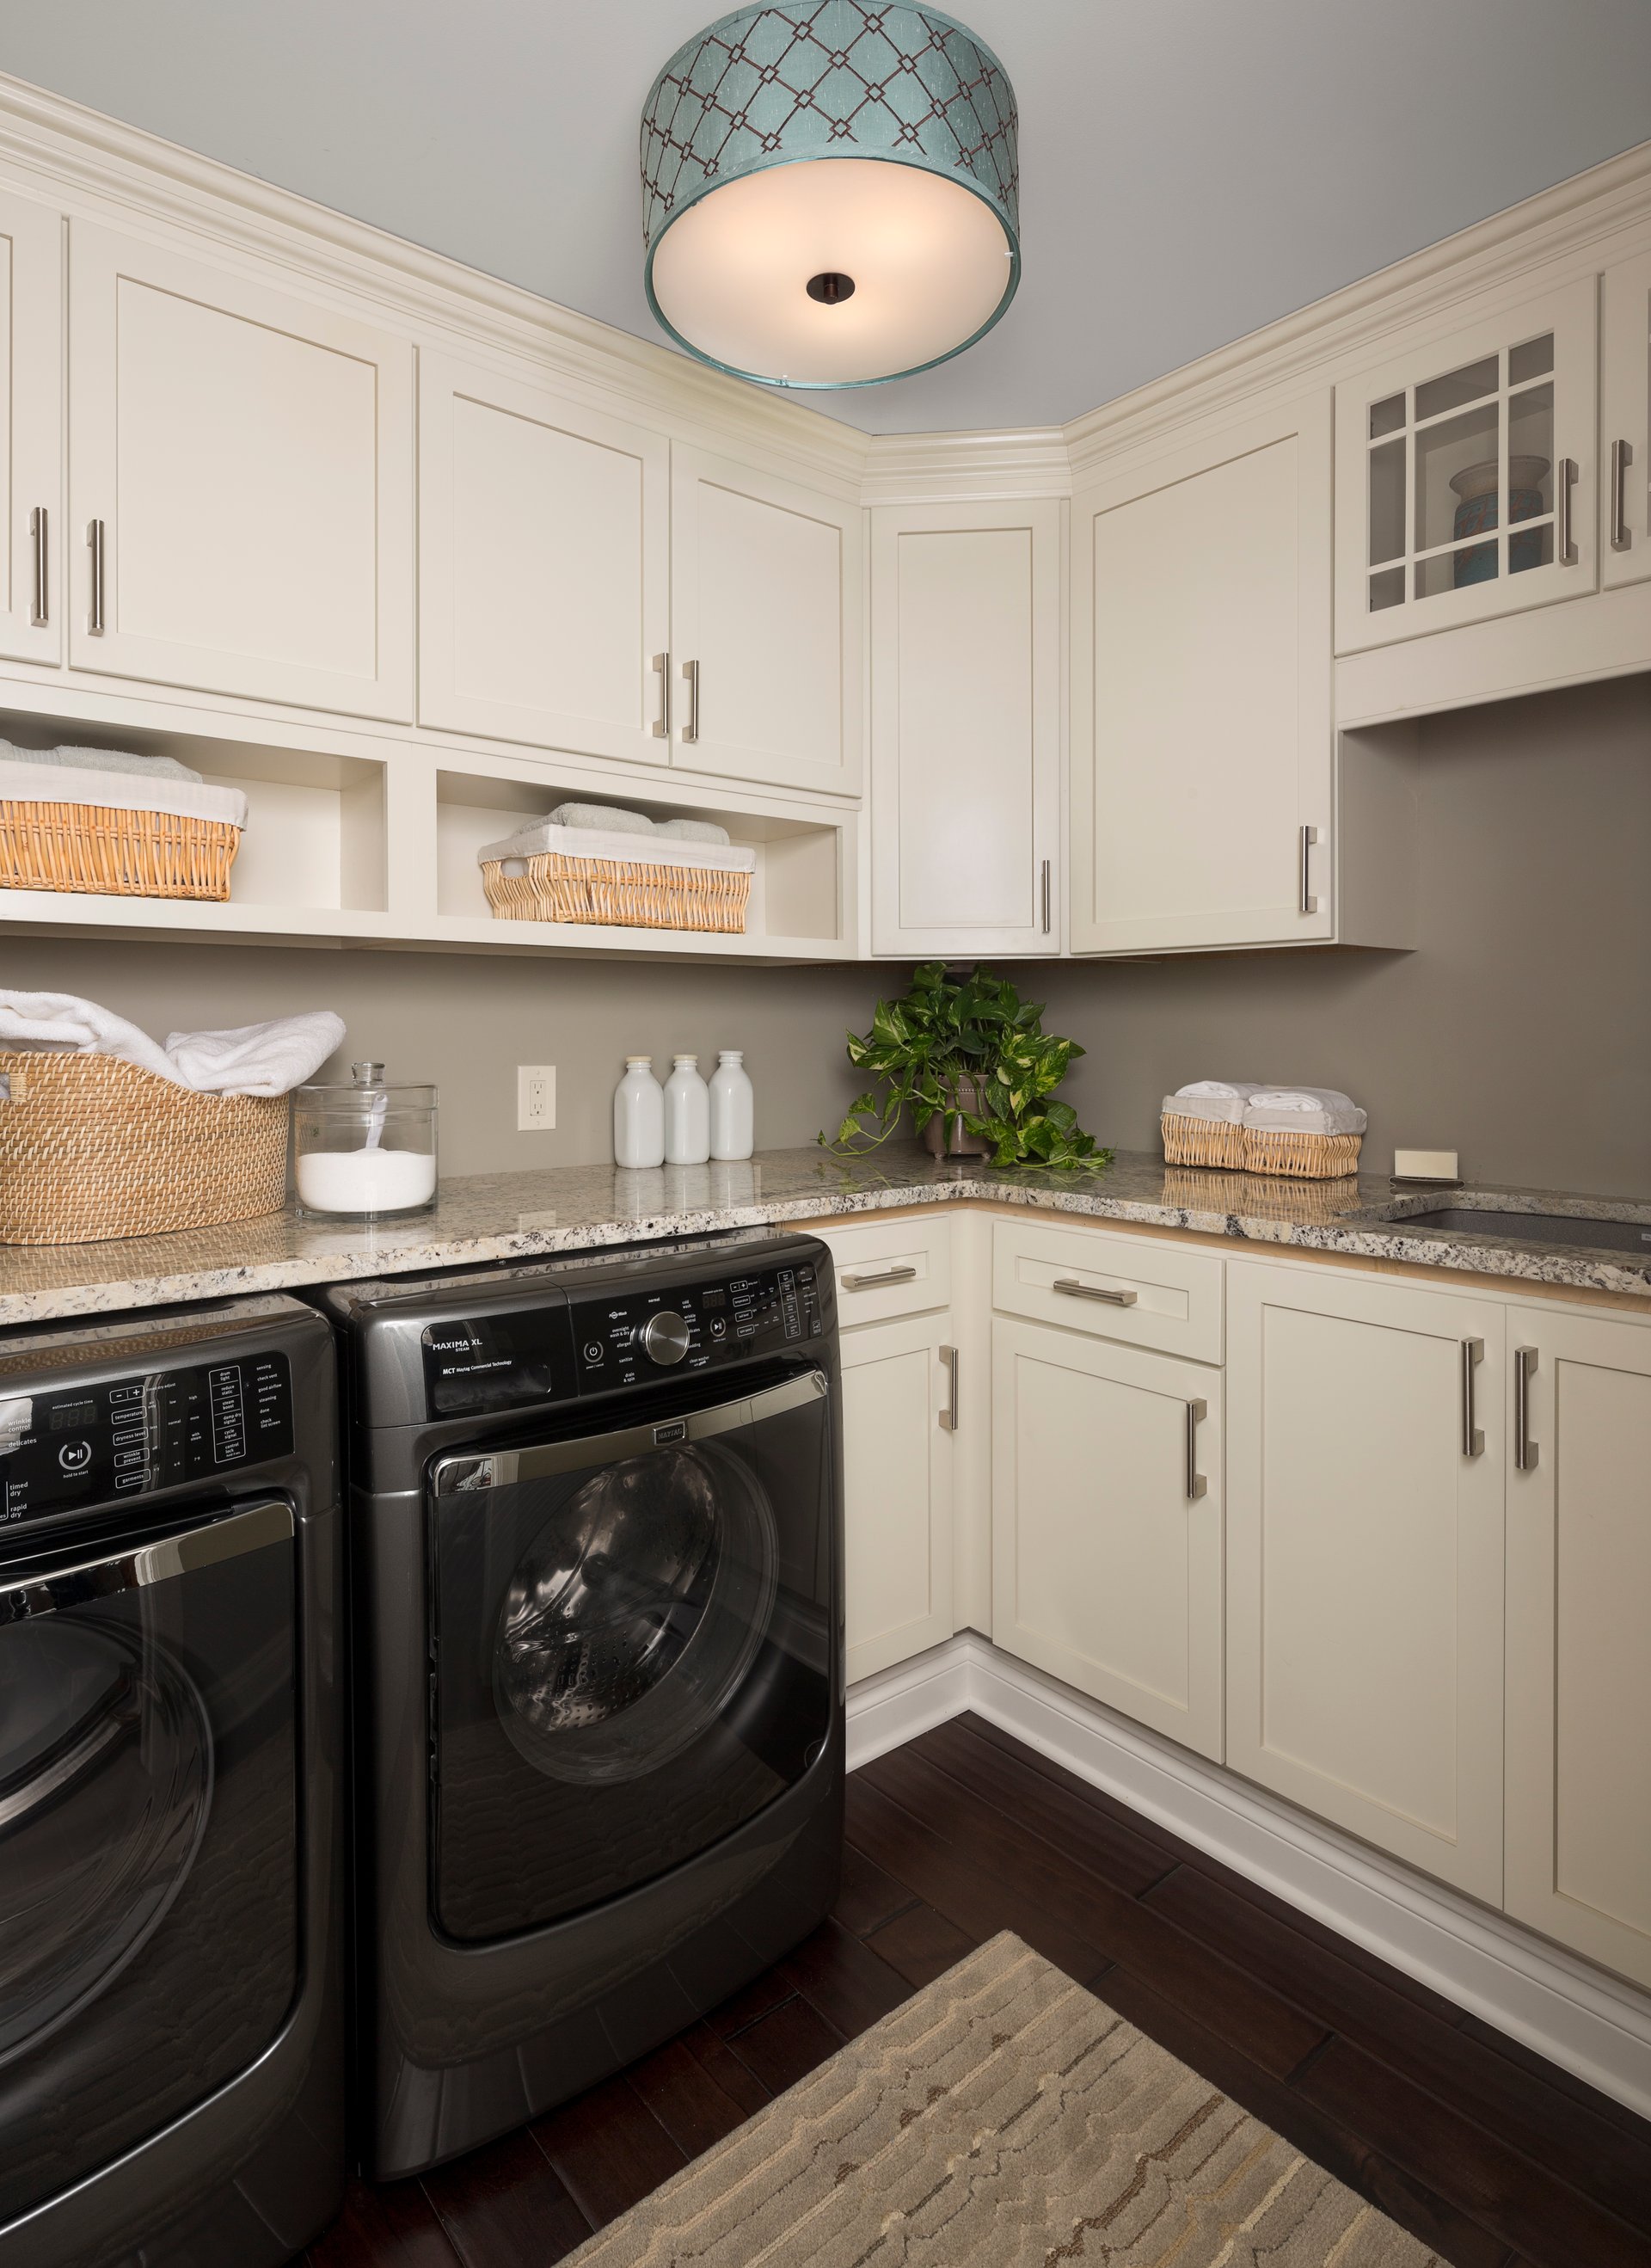 8 Tips to Organize a Laundry Room